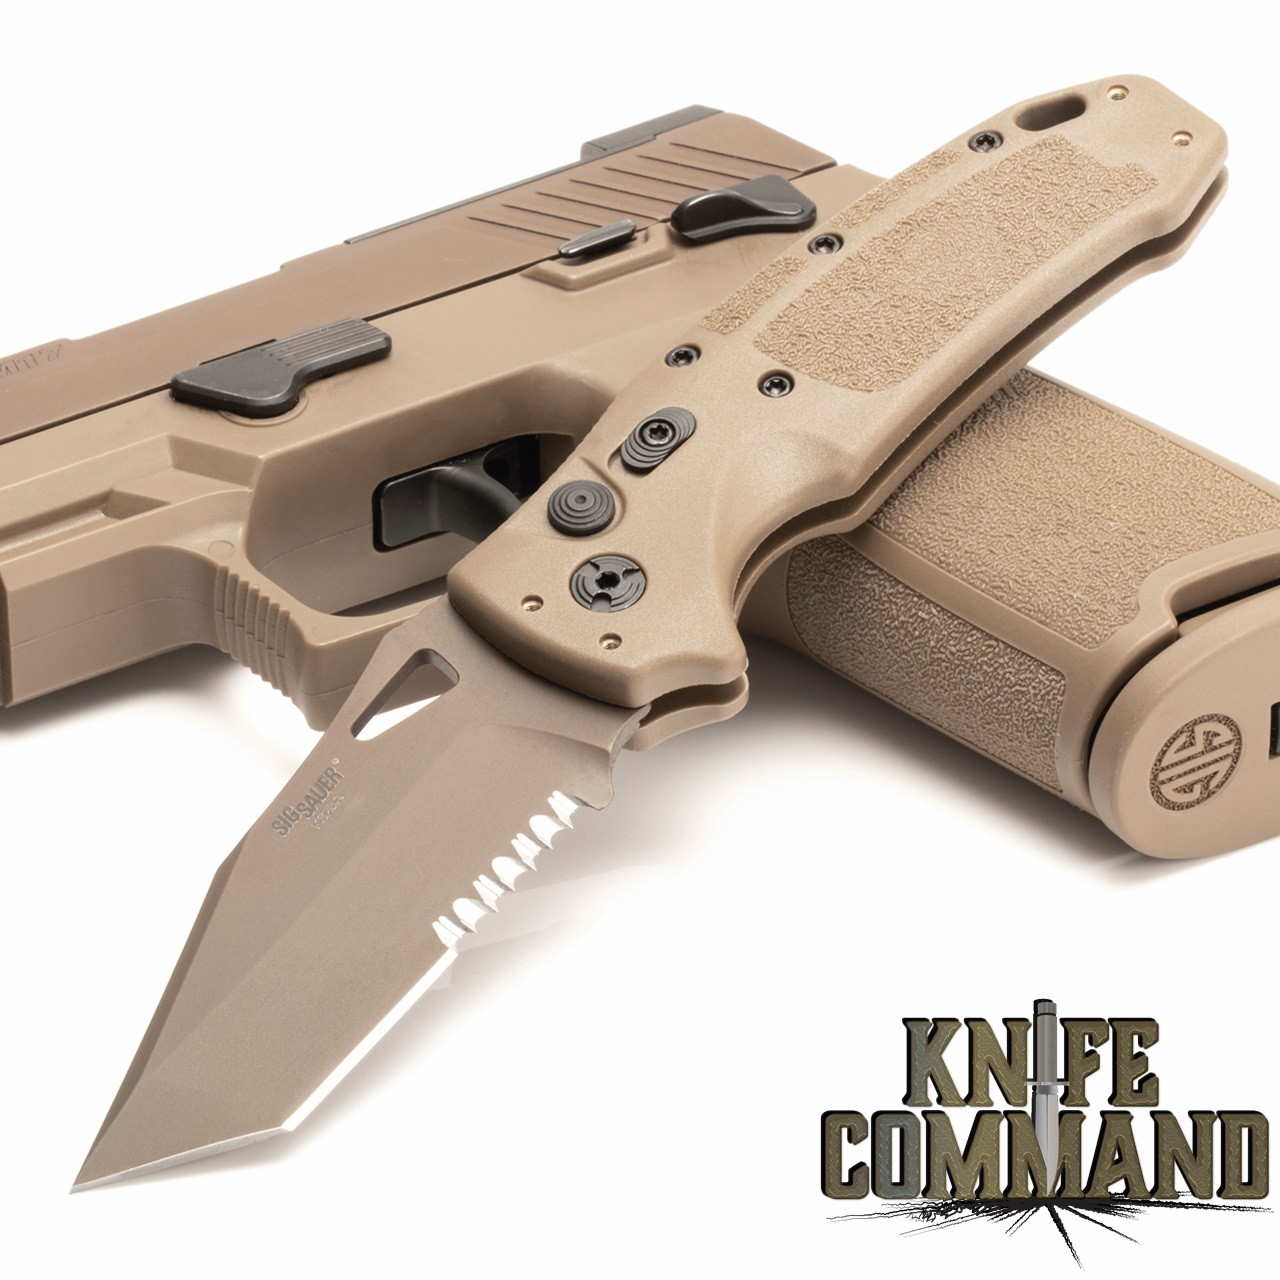 Hogue Knives Sig Sauer K320A Coyote Tan Automatic Folder 3.5" Tanto Blade - Coyote PVD Finish, Poly Frame Knife 36323